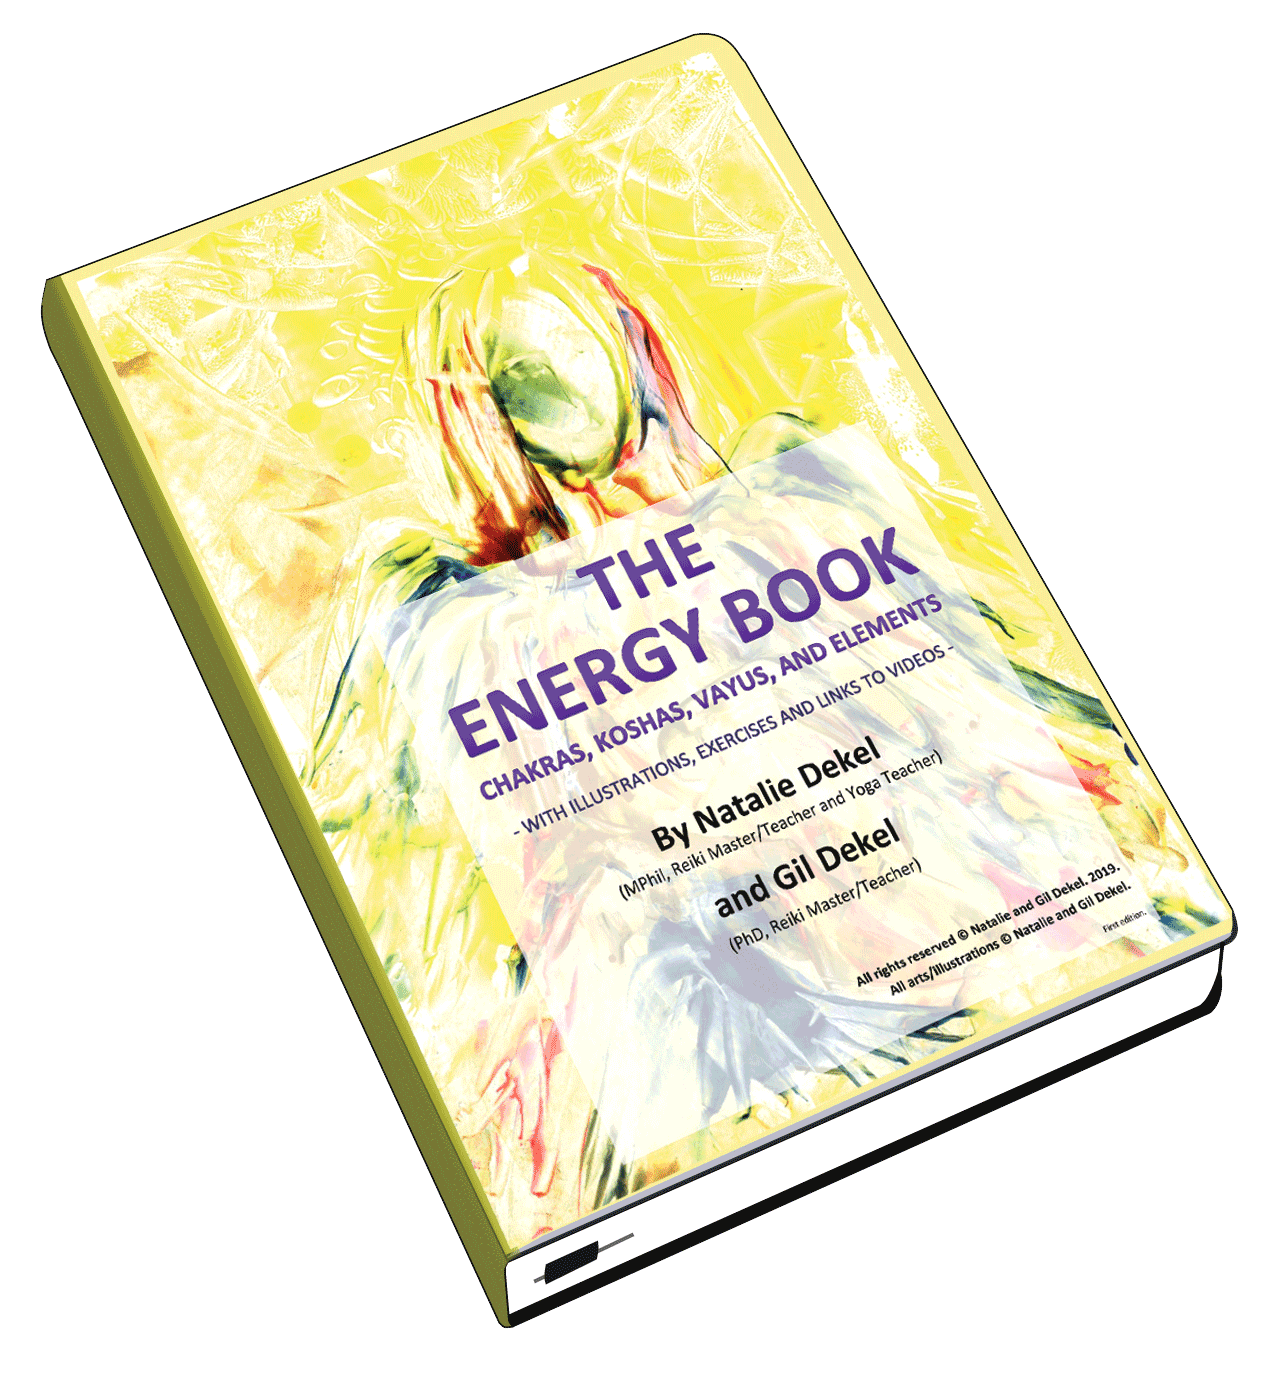 Energy book - click for info